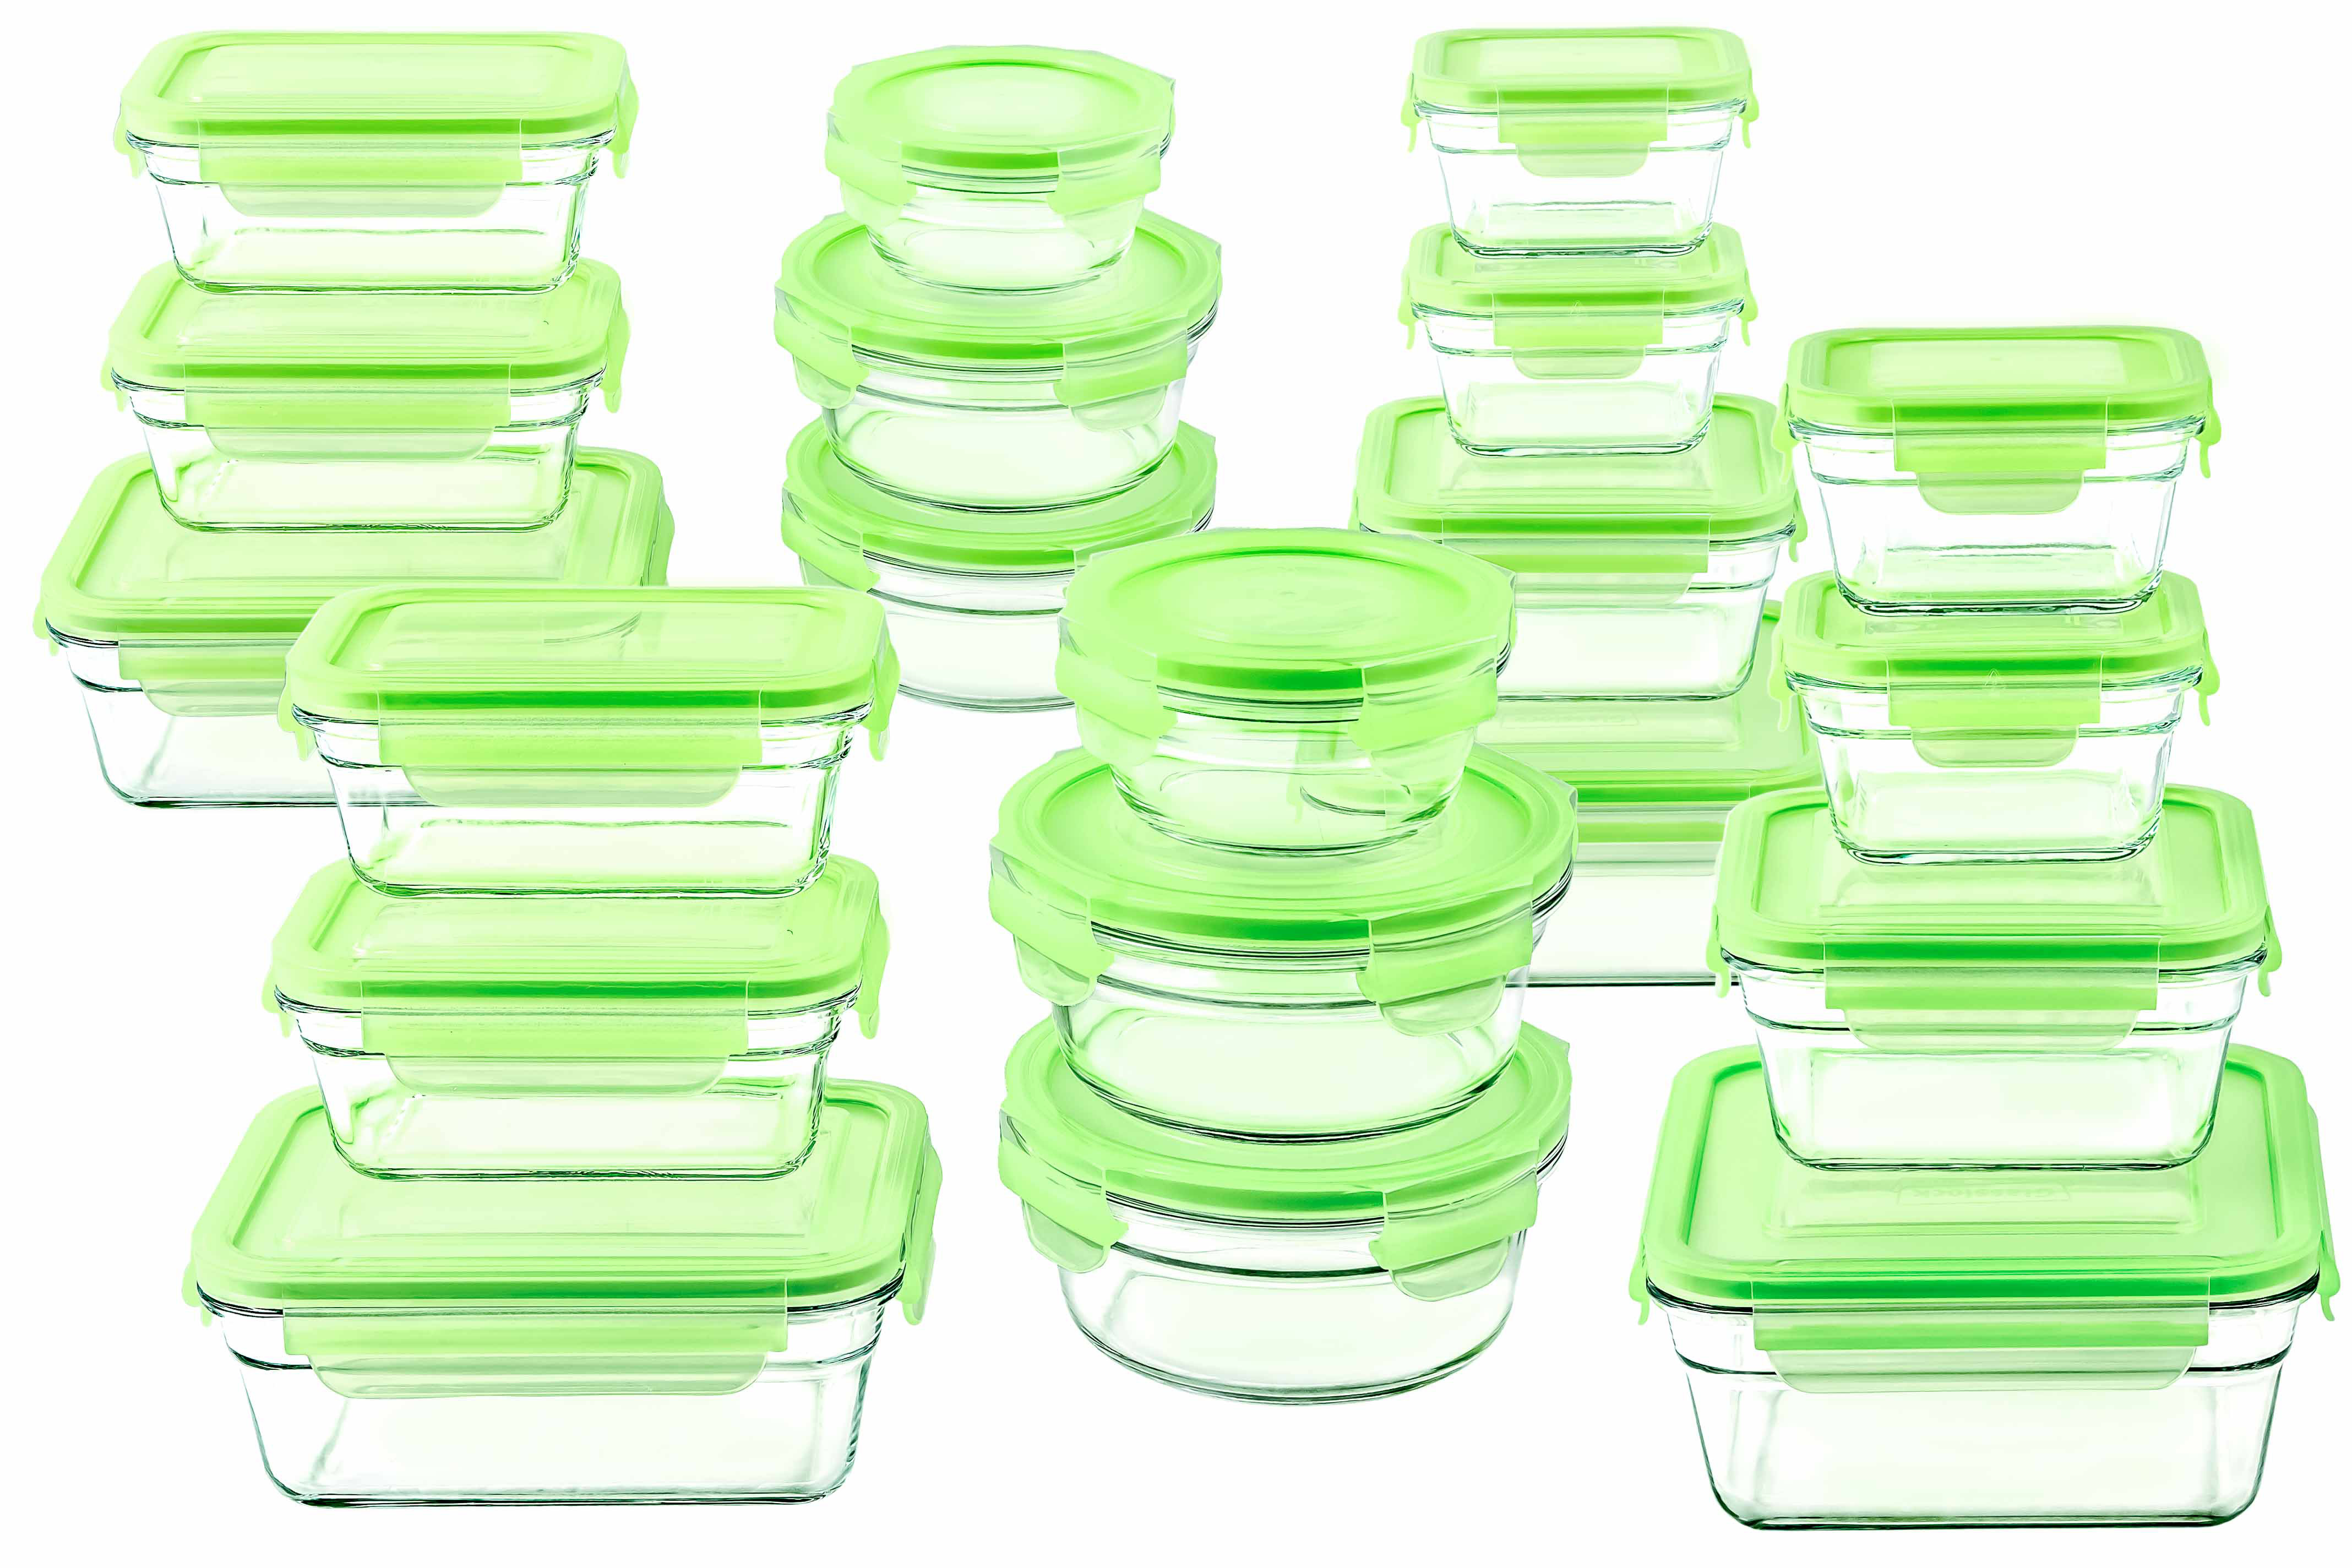 12pc Plastic Airtight Food Storage Containers Set with Lids 1.6L